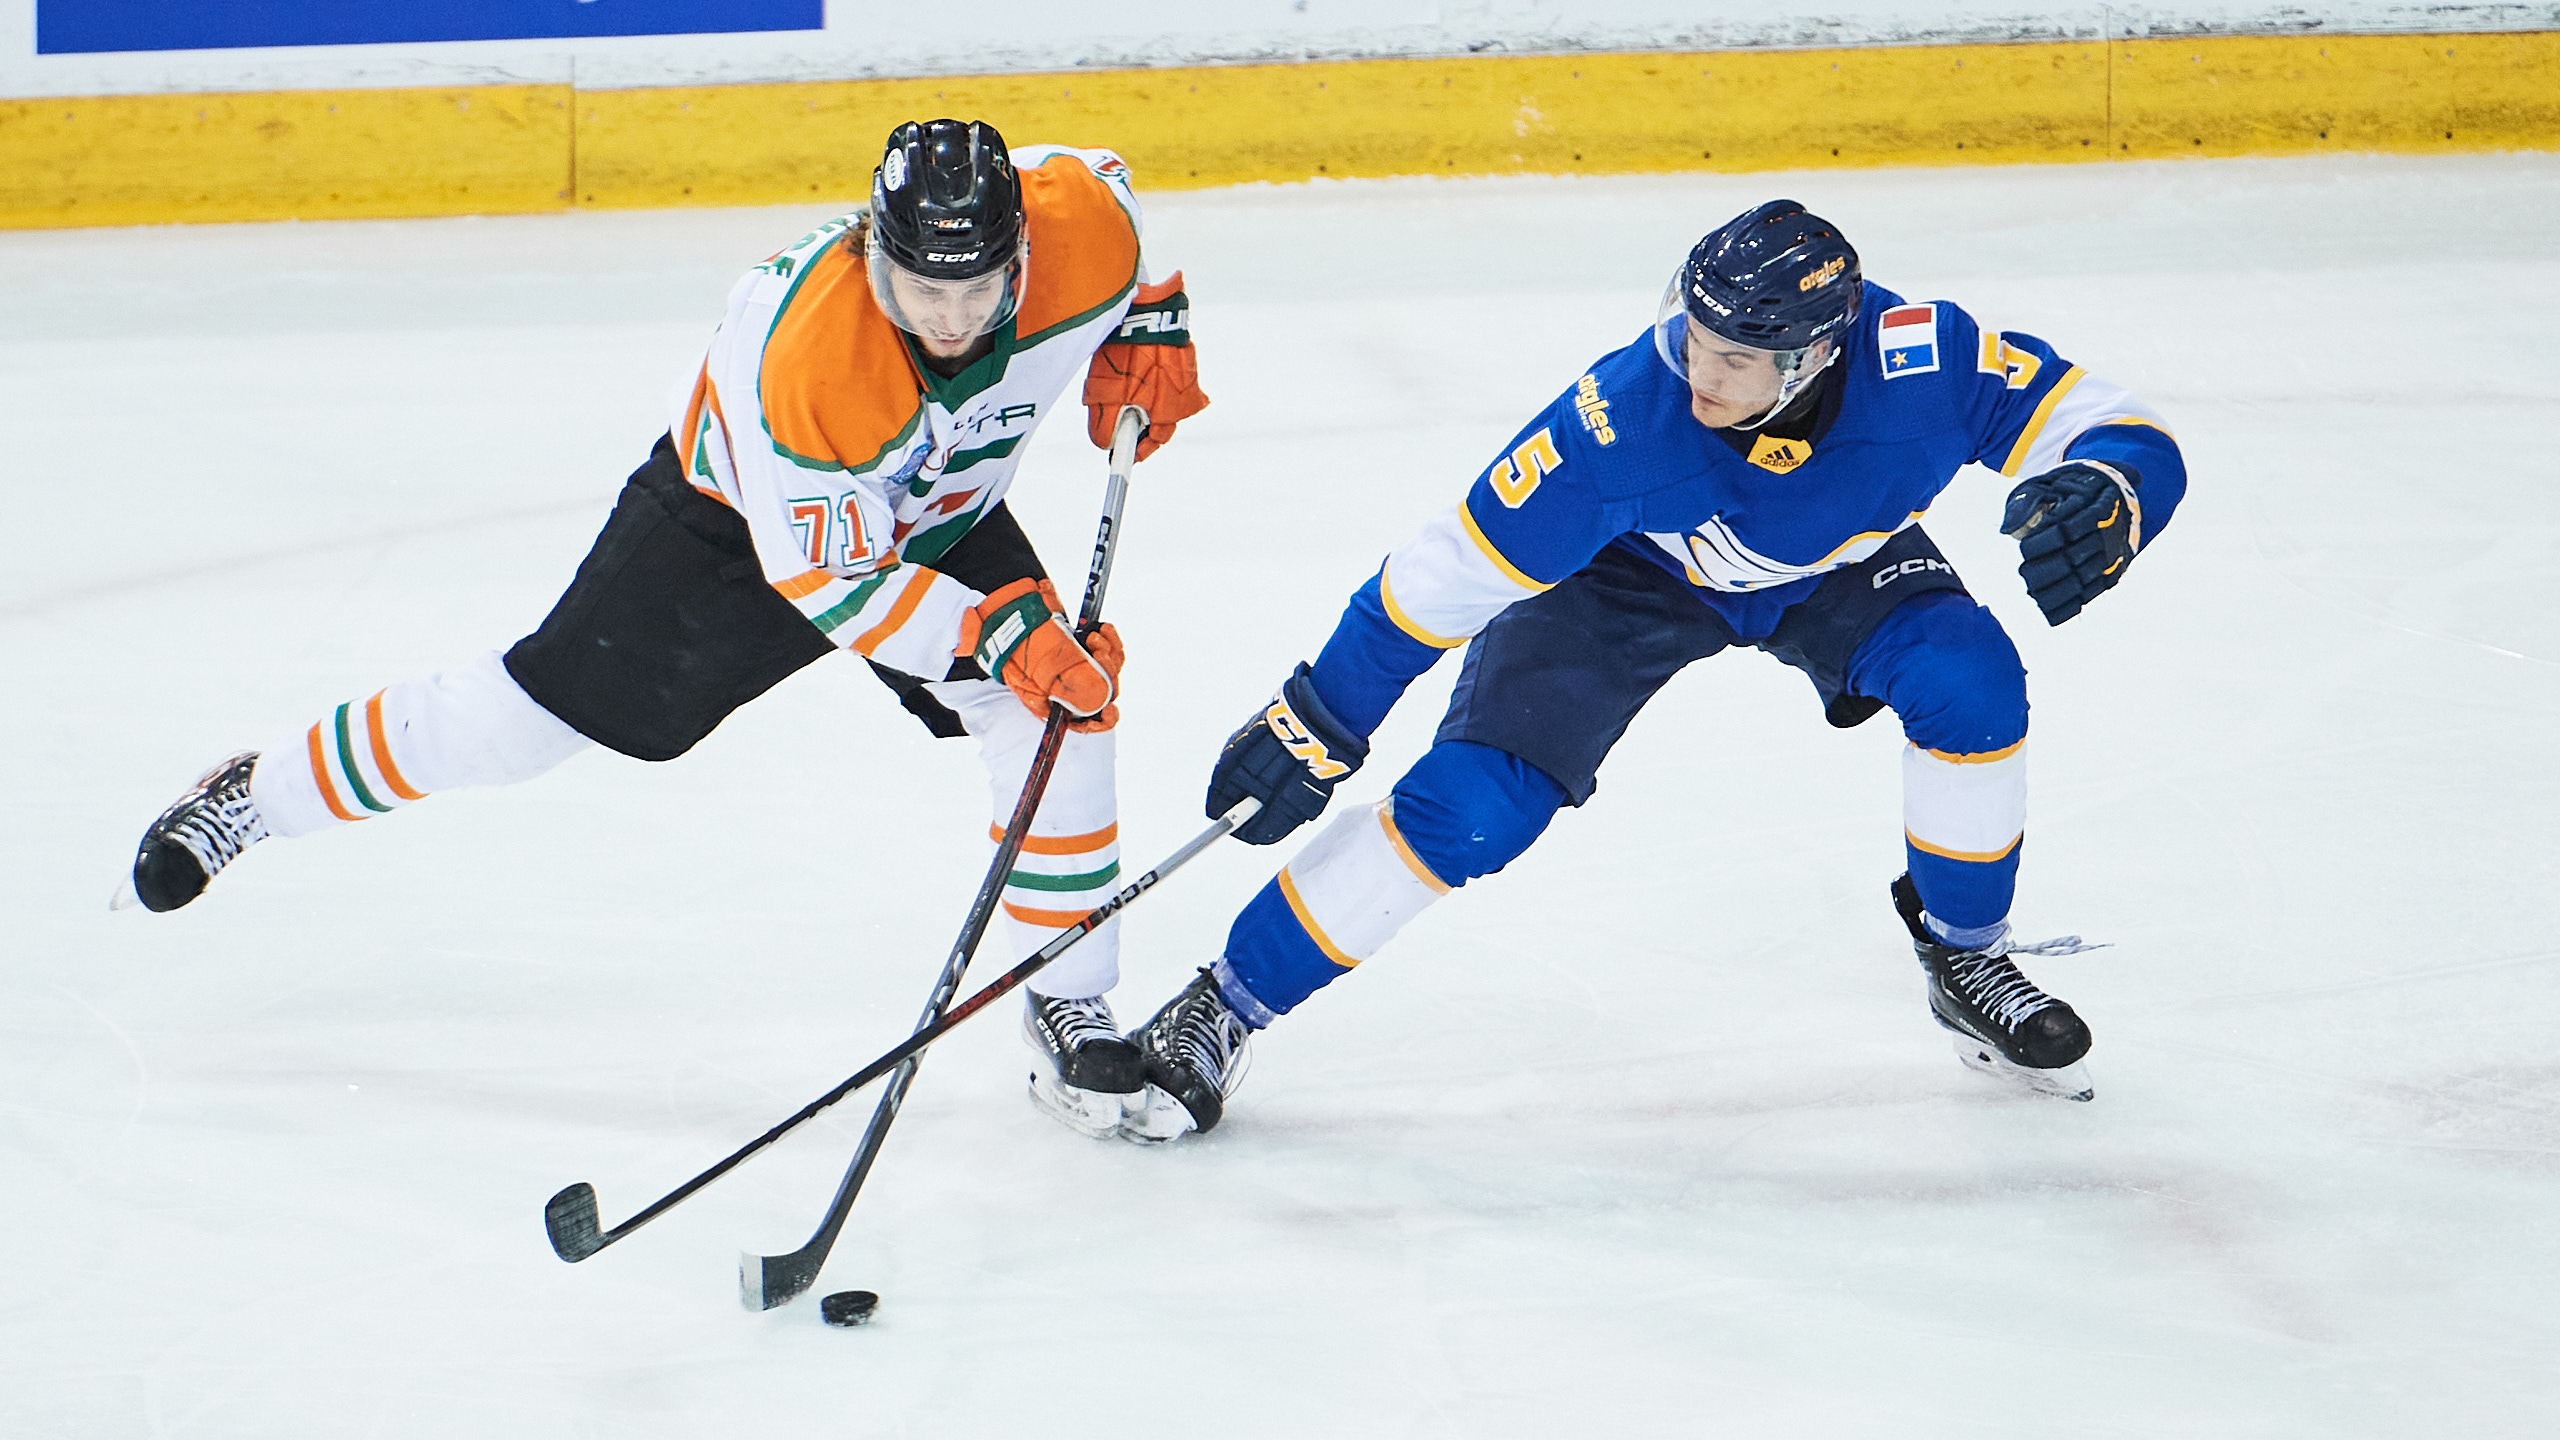 A UQTR player skates with the puck while a Moncton players tries to go for the puck